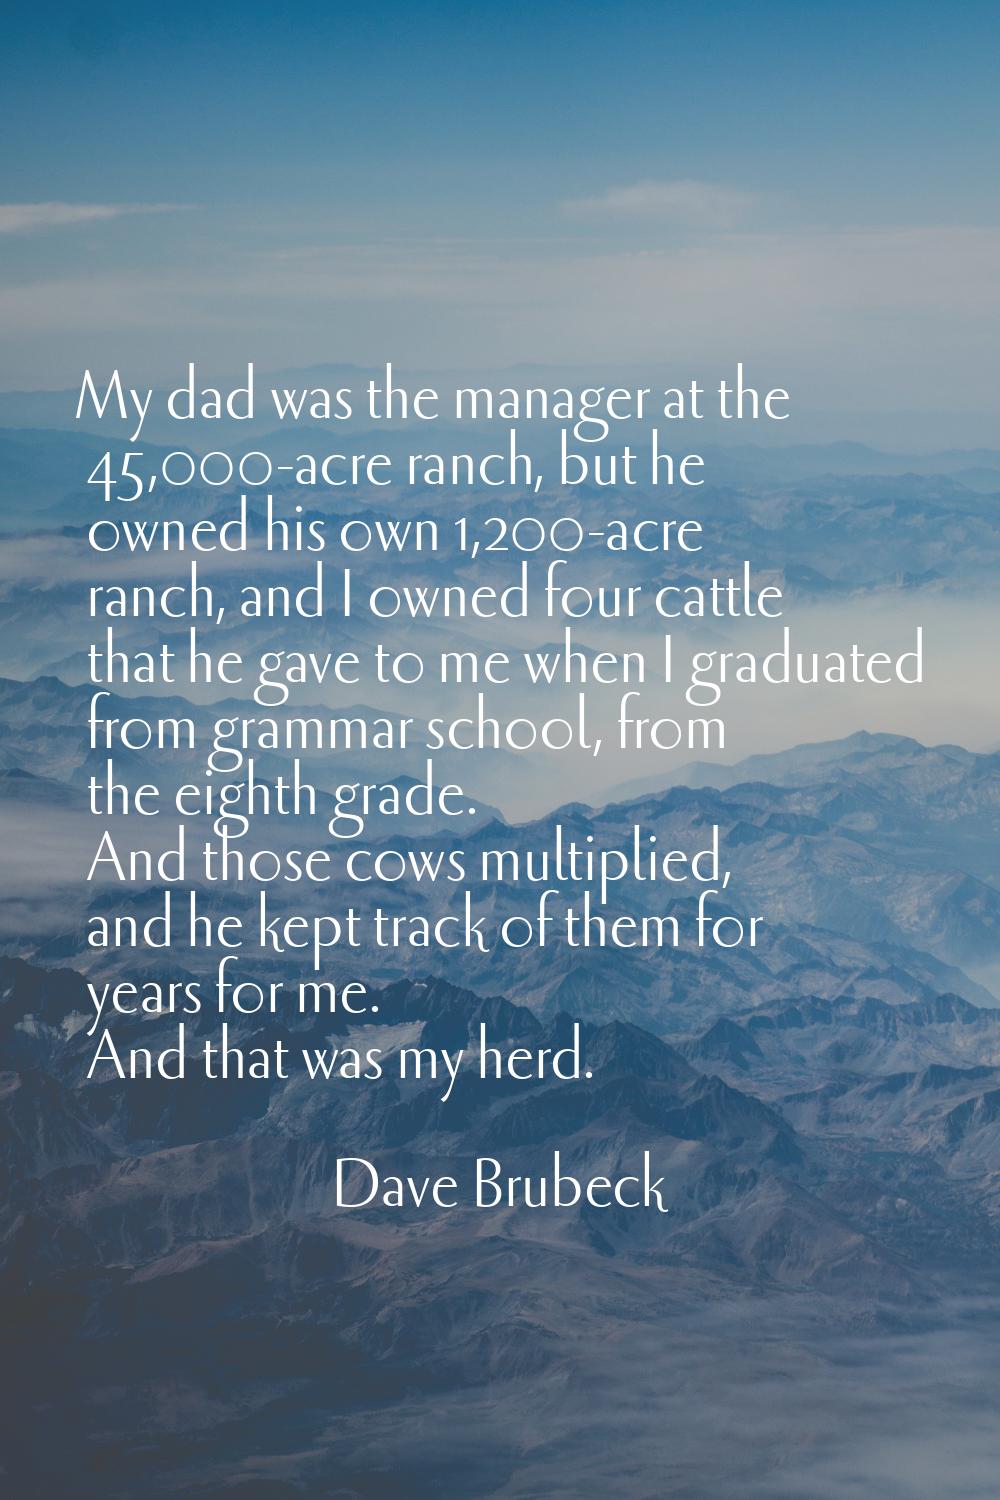 My dad was the manager at the 45,000-acre ranch, but he owned his own 1,200-acre ranch, and I owned